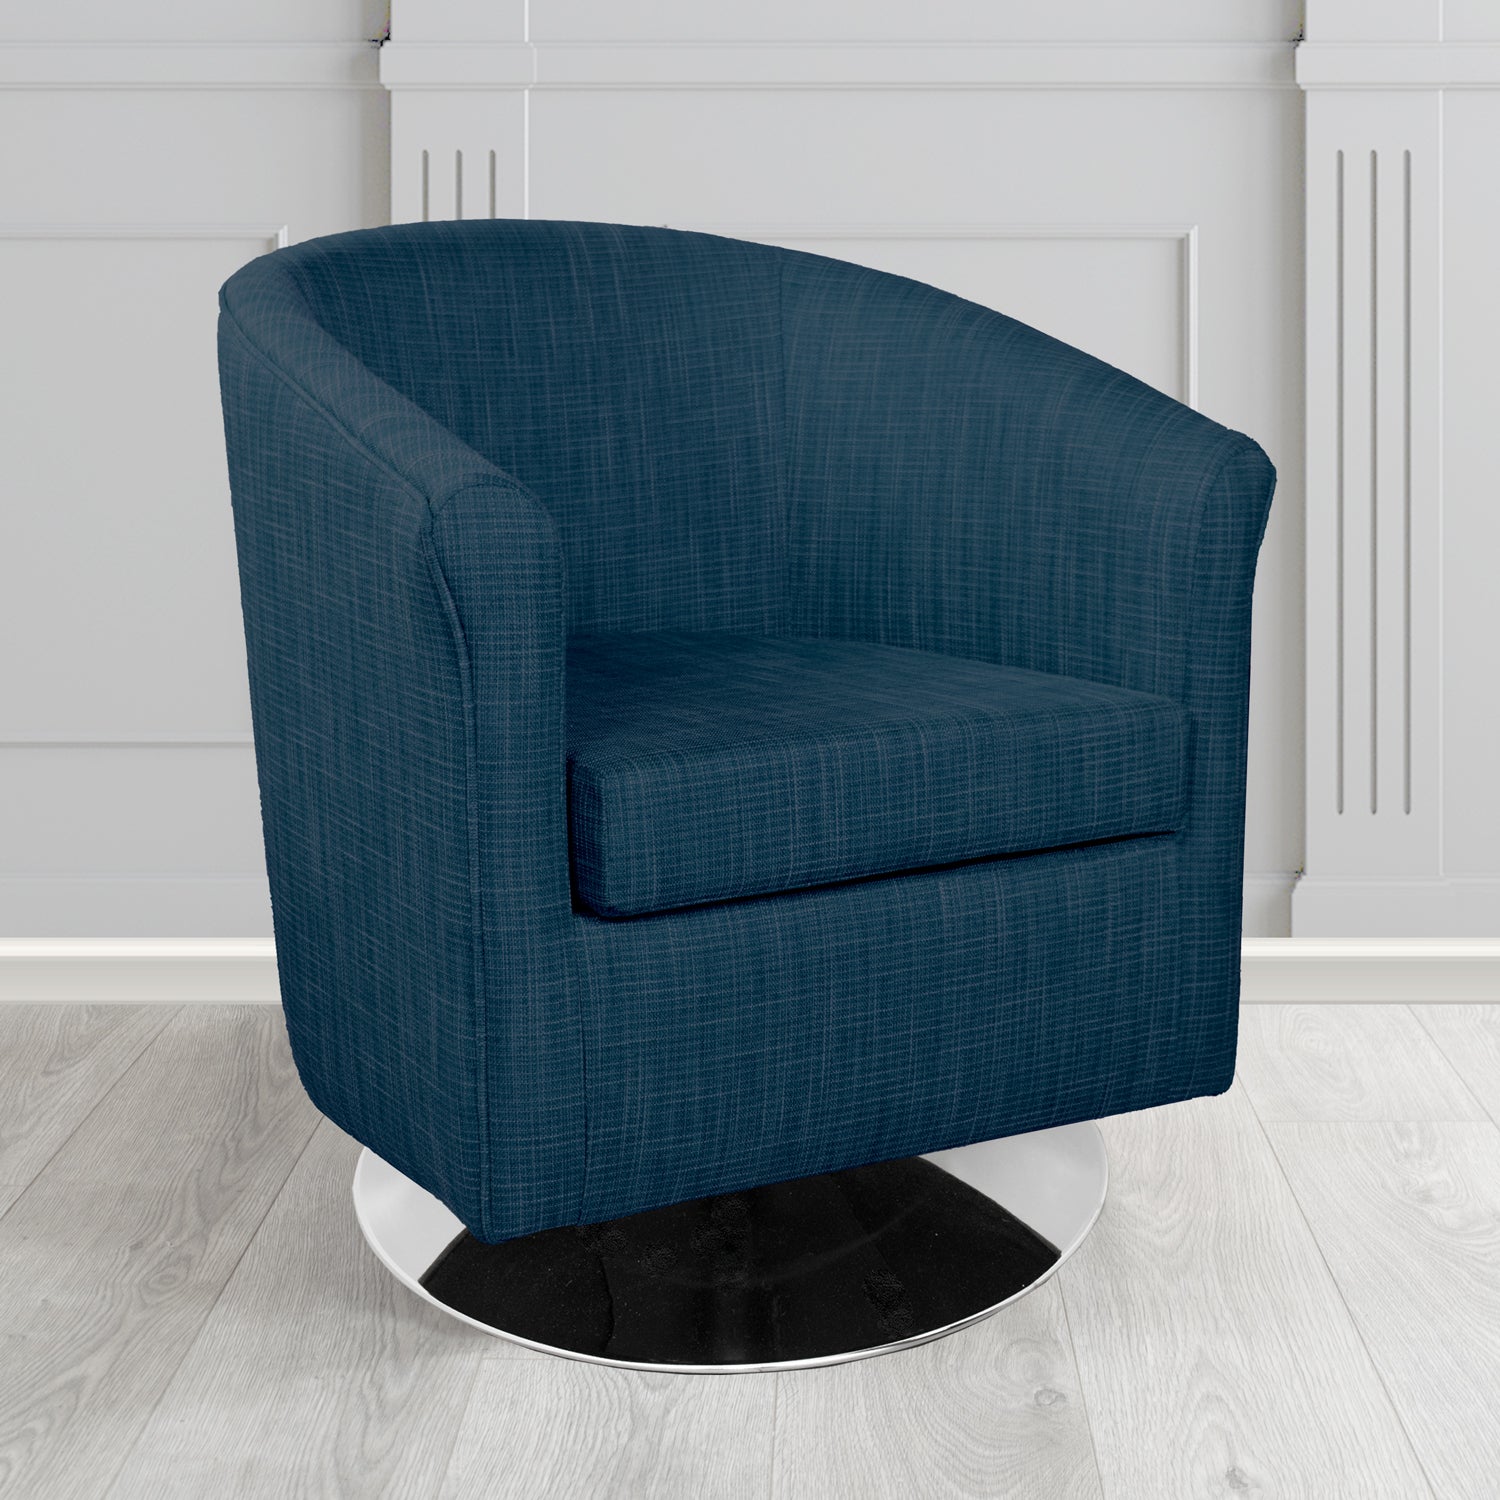 Tuscany Ravel Prussian Blue Contract Crib 5 Fabric Swivel Tub Chair - Antimicrobial & Water-Resistant - The Tub Chair Shop